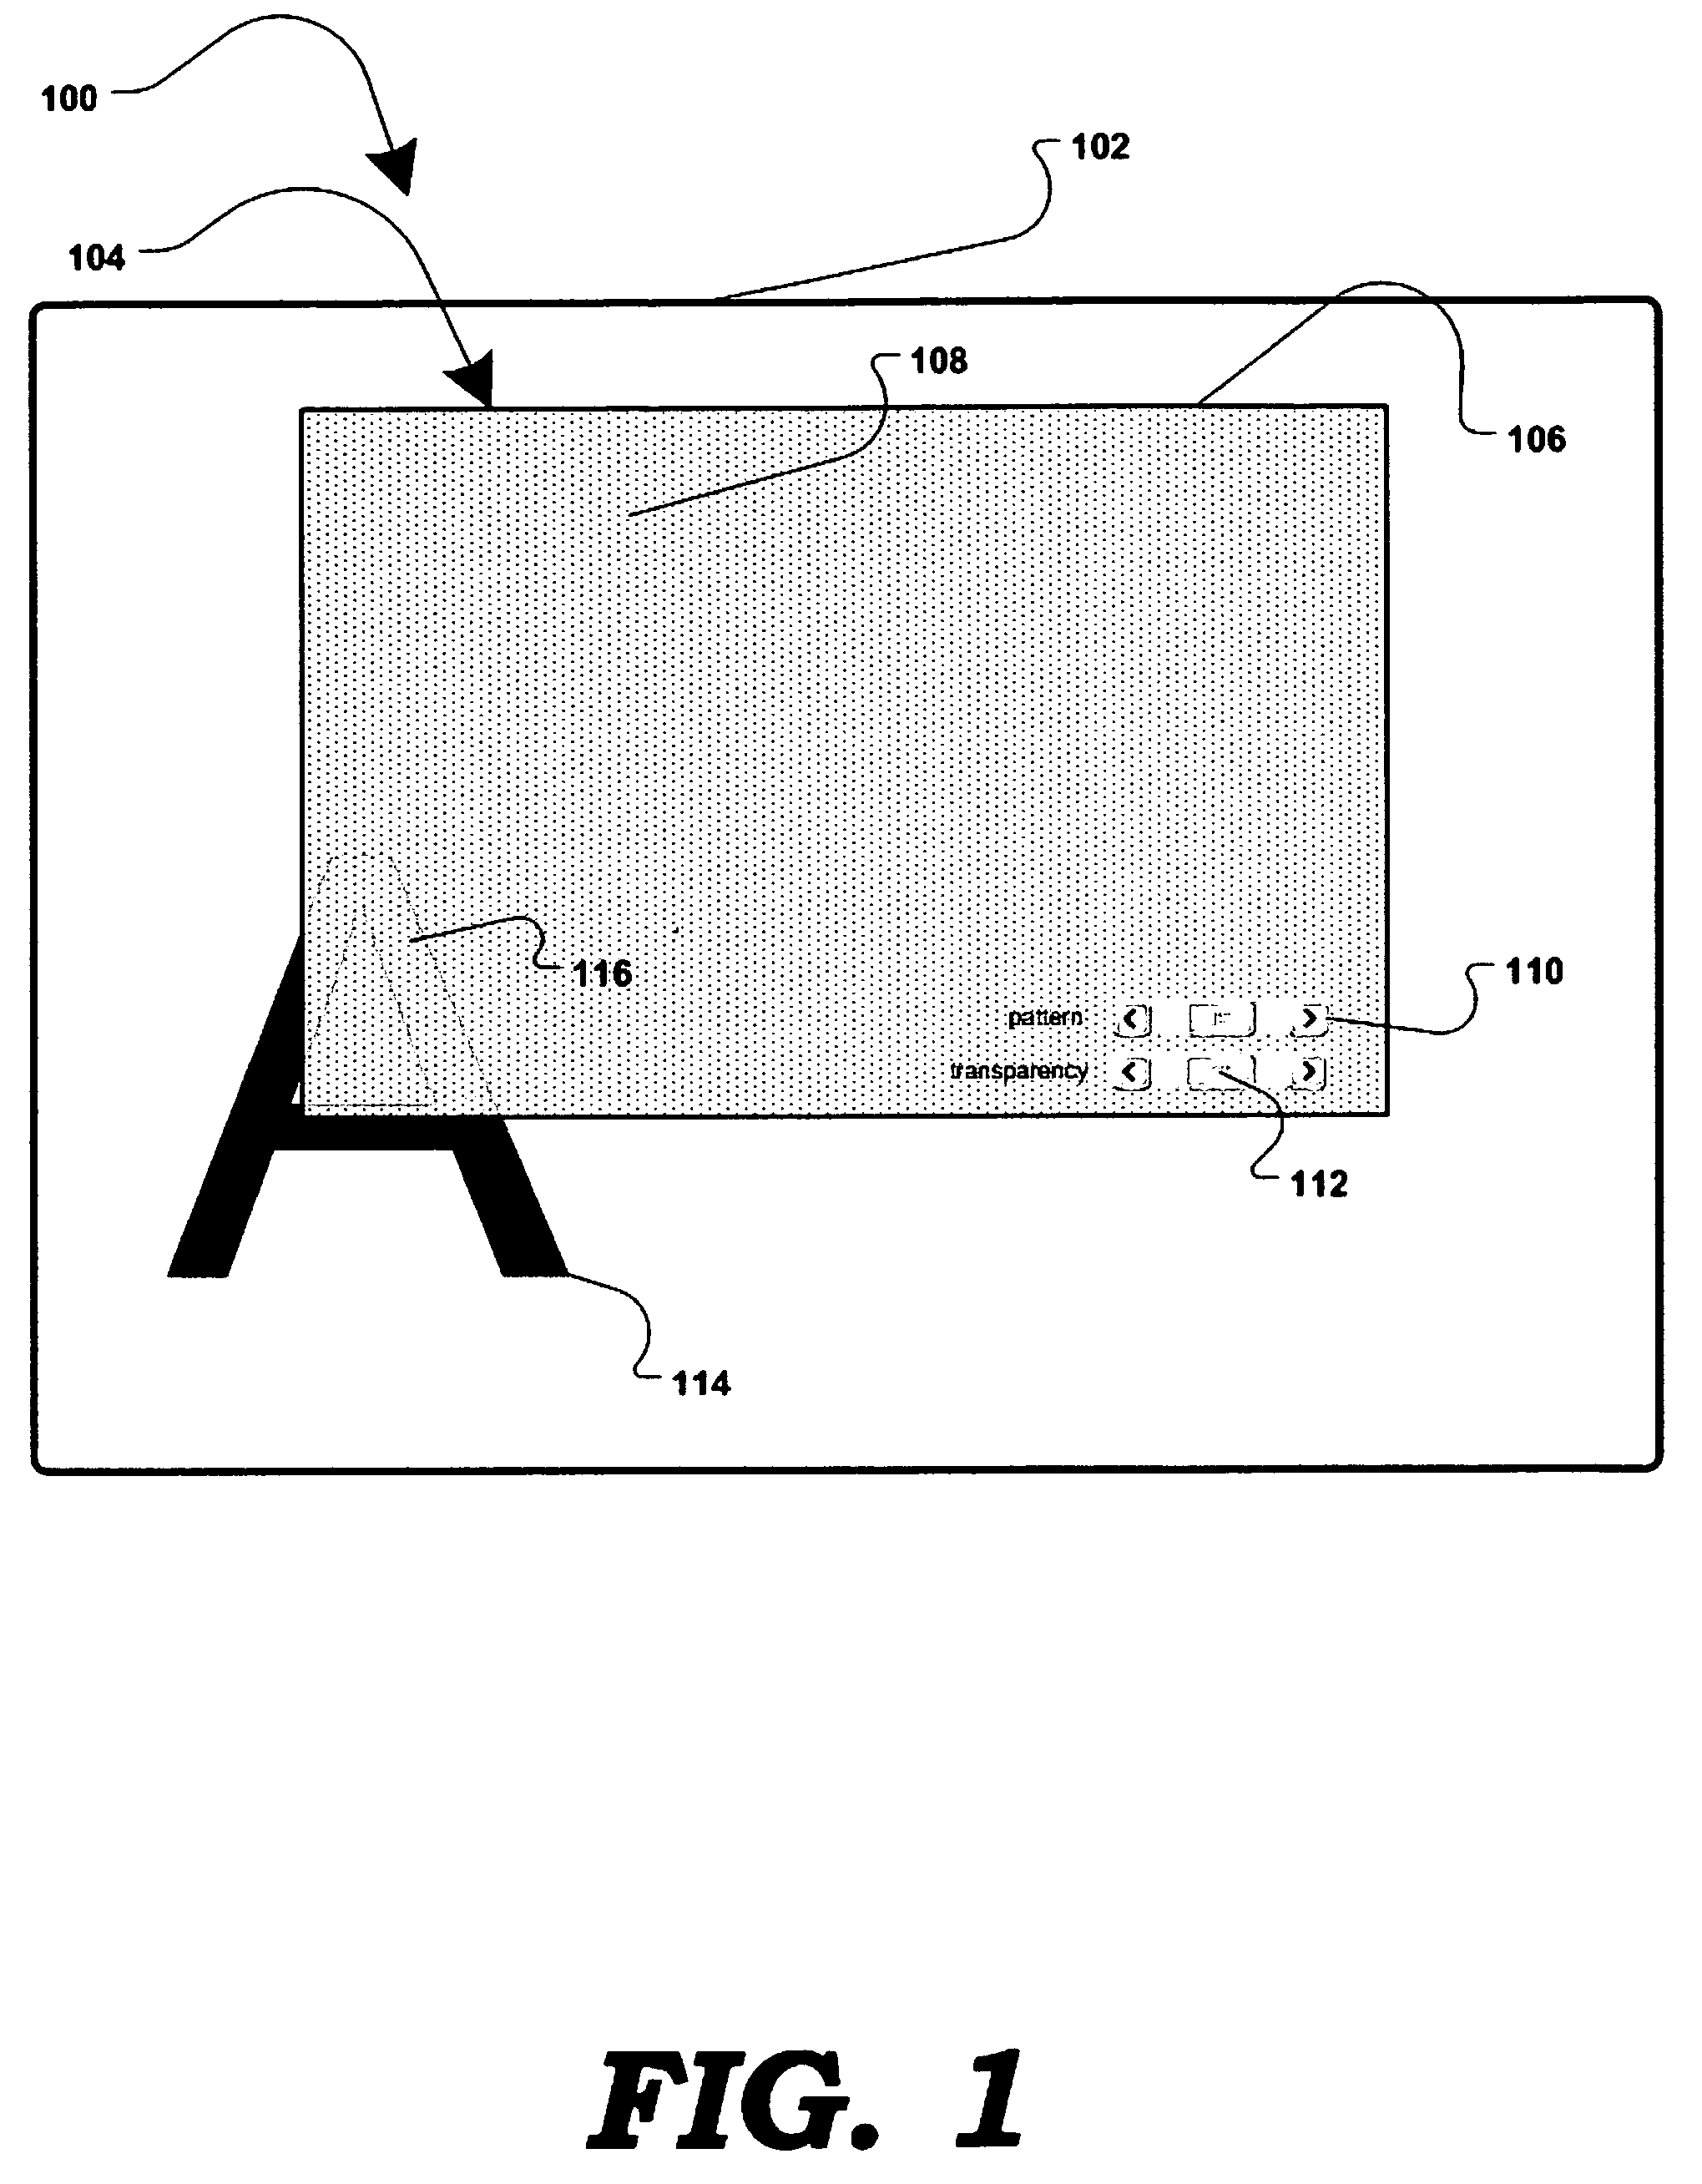 Software-based method for gaining privacy by affecting the screen of a computing device